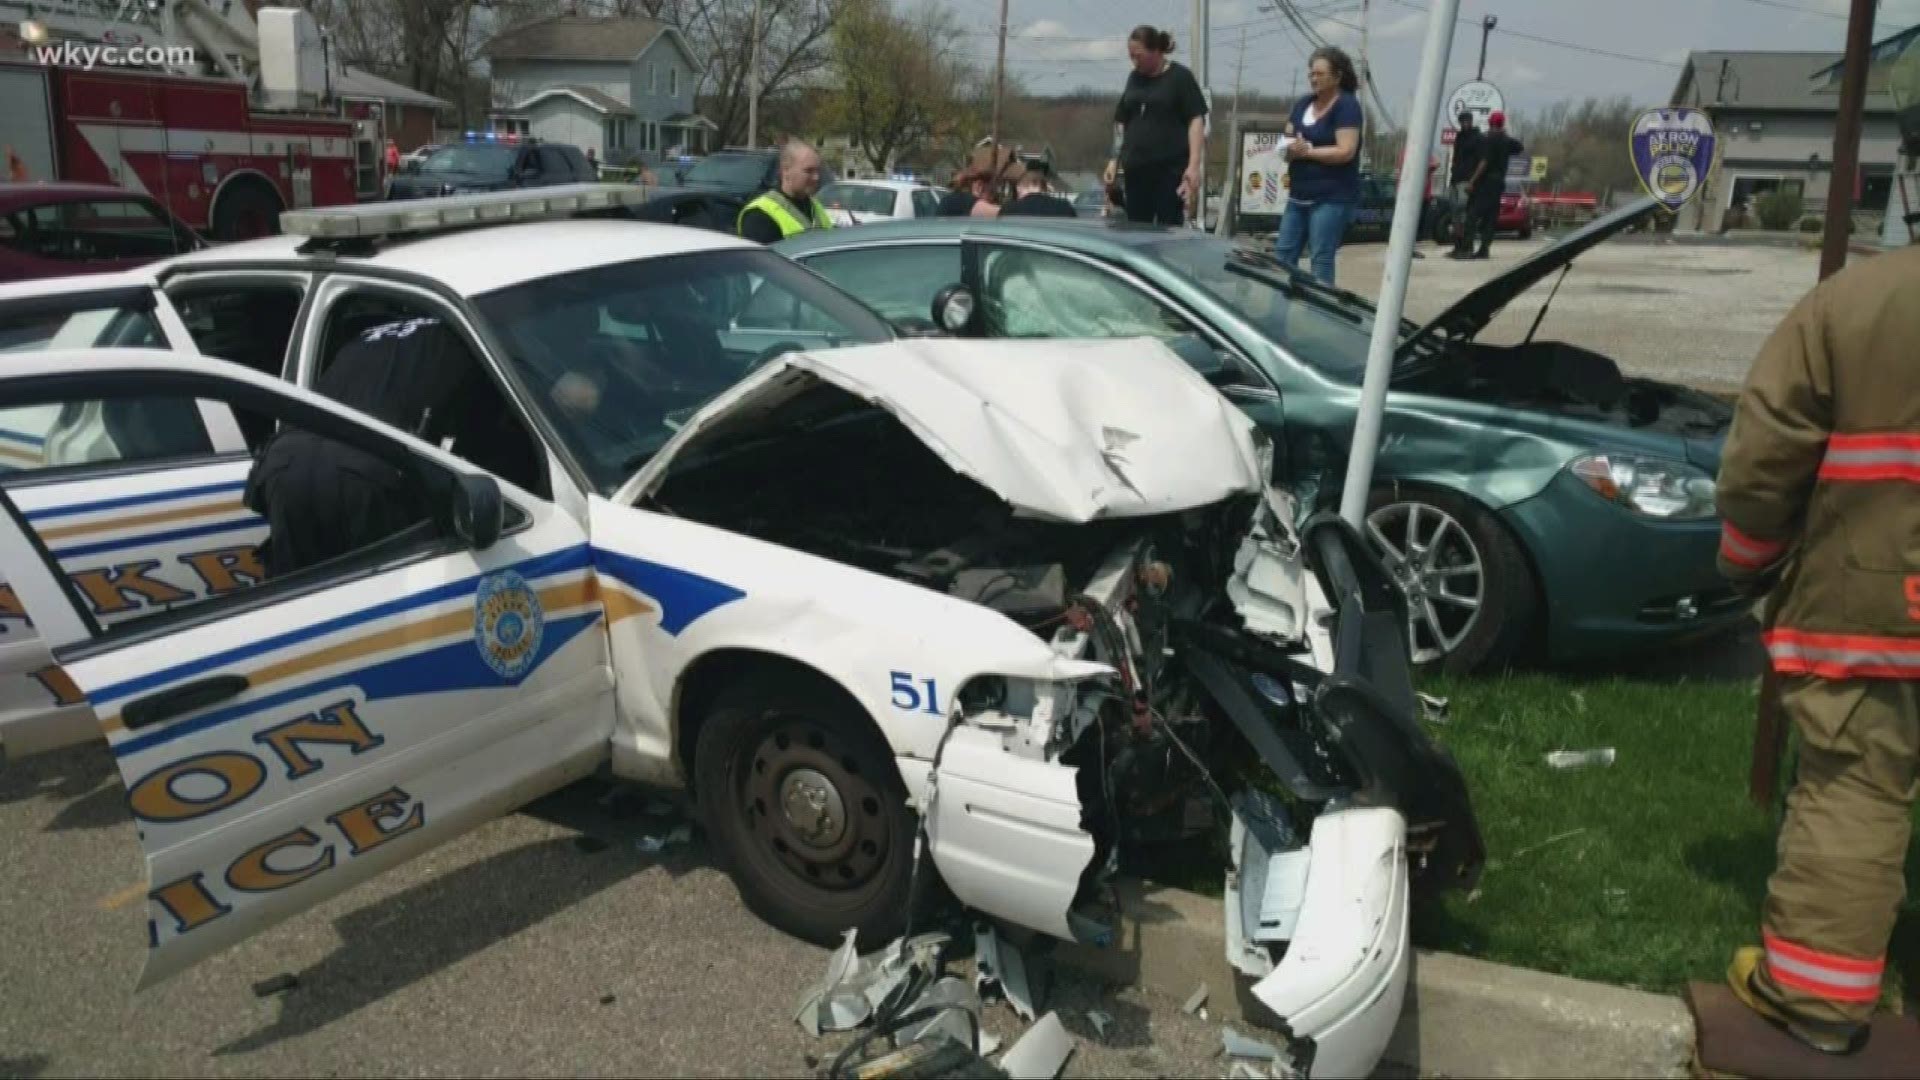 Car crashes into Akron police cruiser assisting with funeral procession